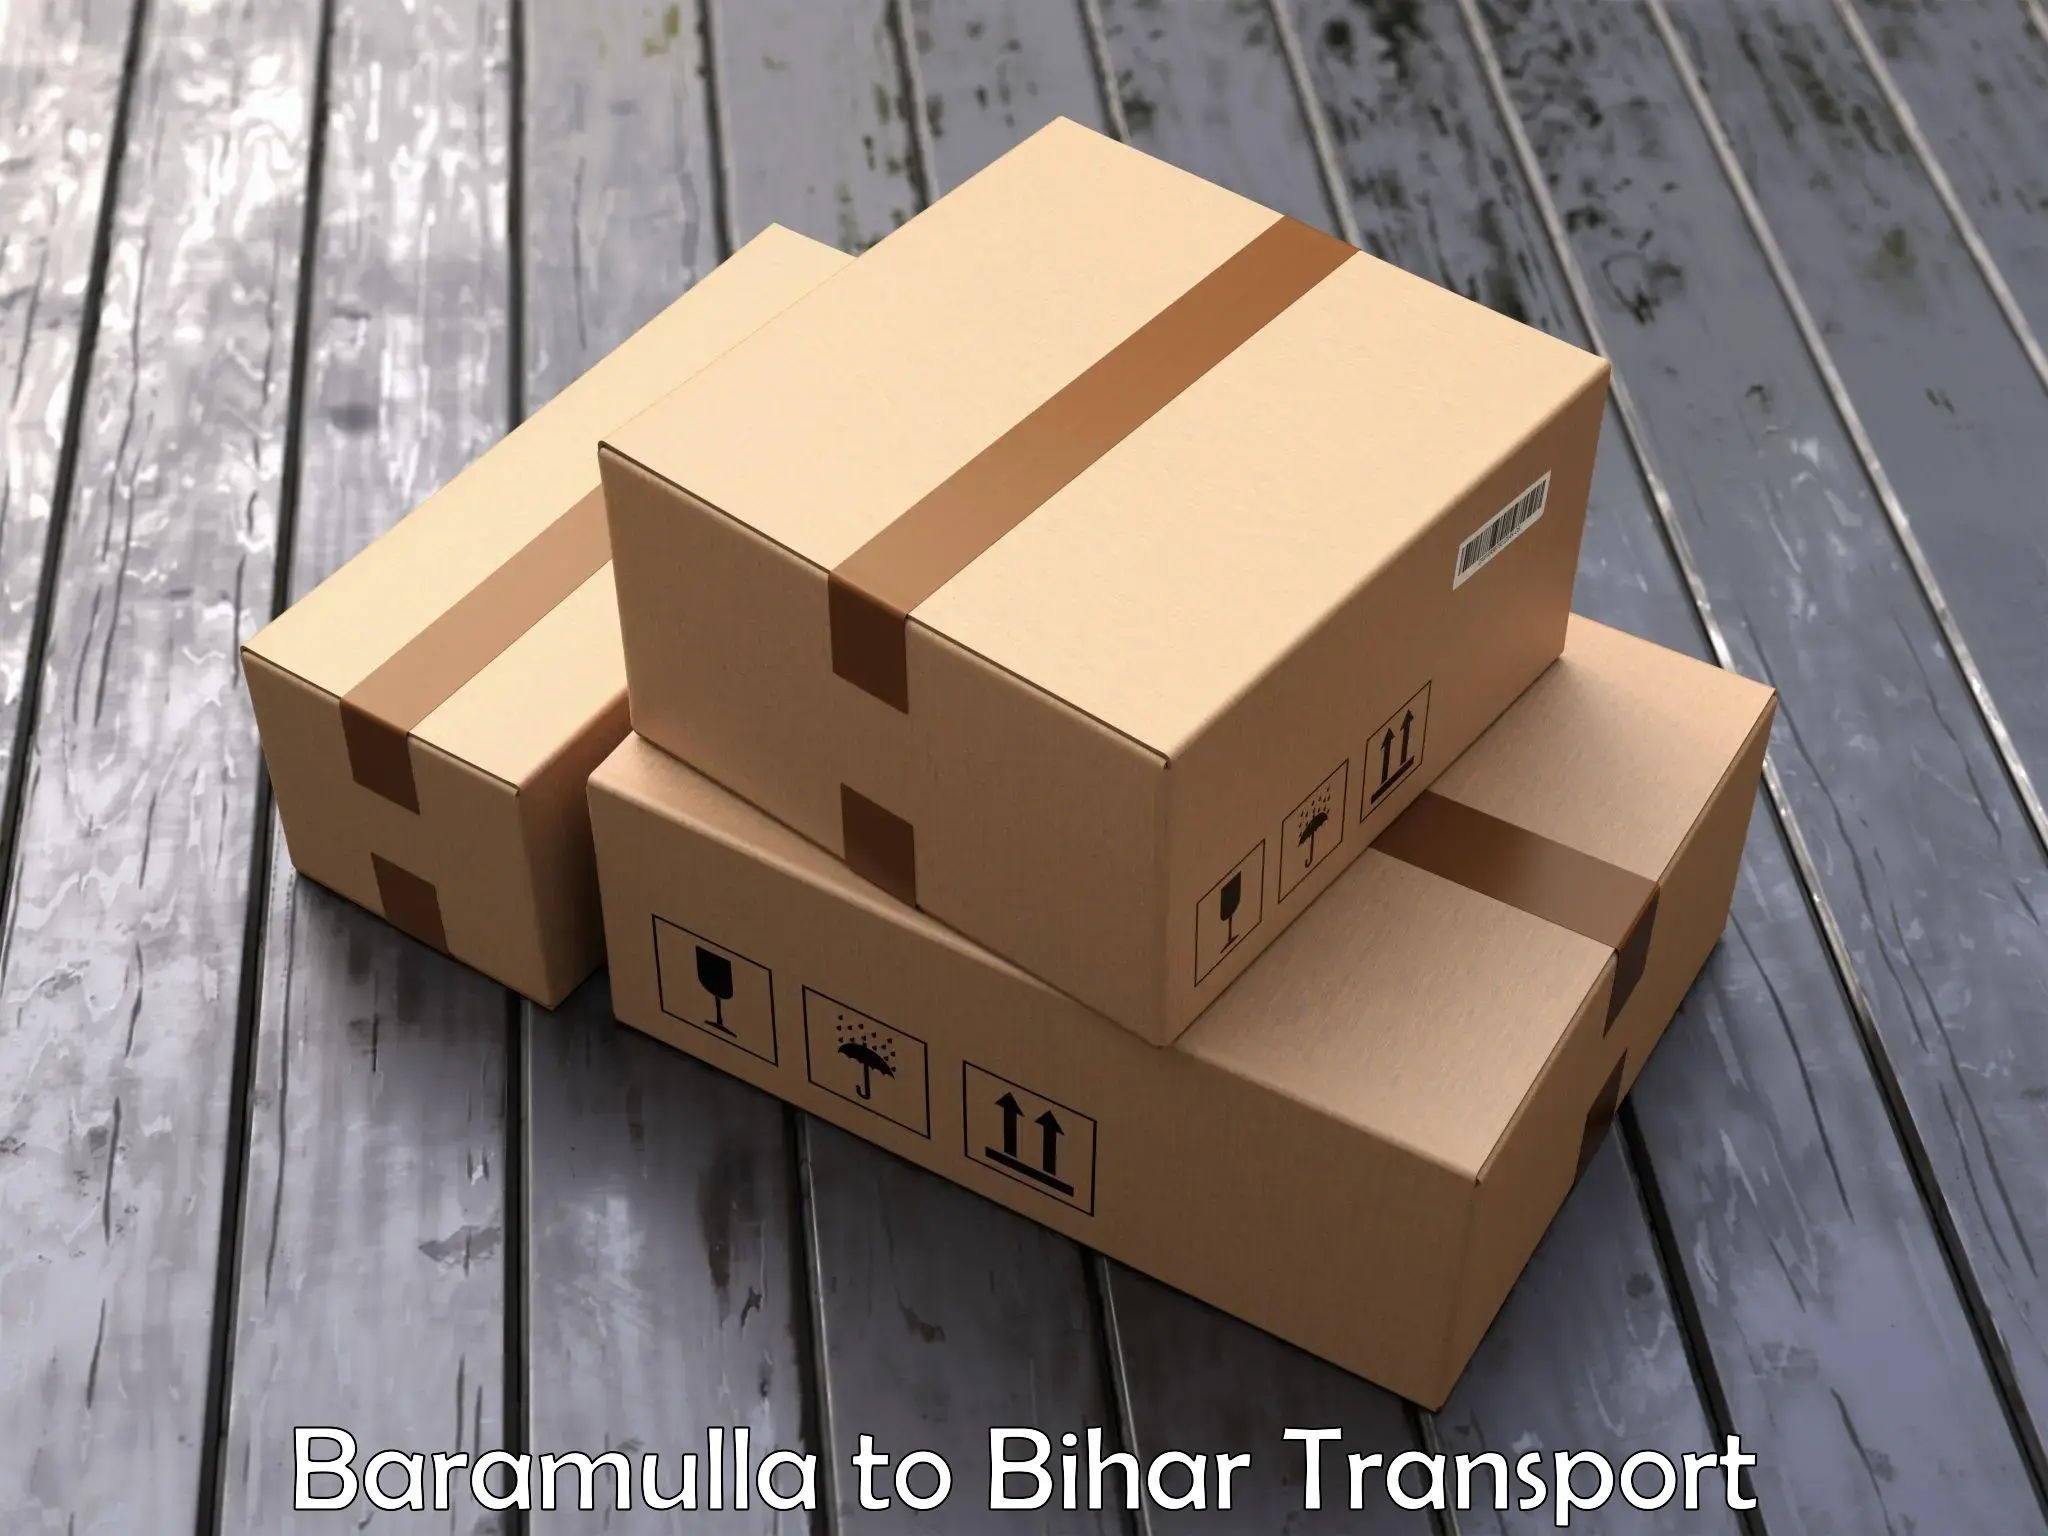 Goods delivery service Baramulla to Katihar